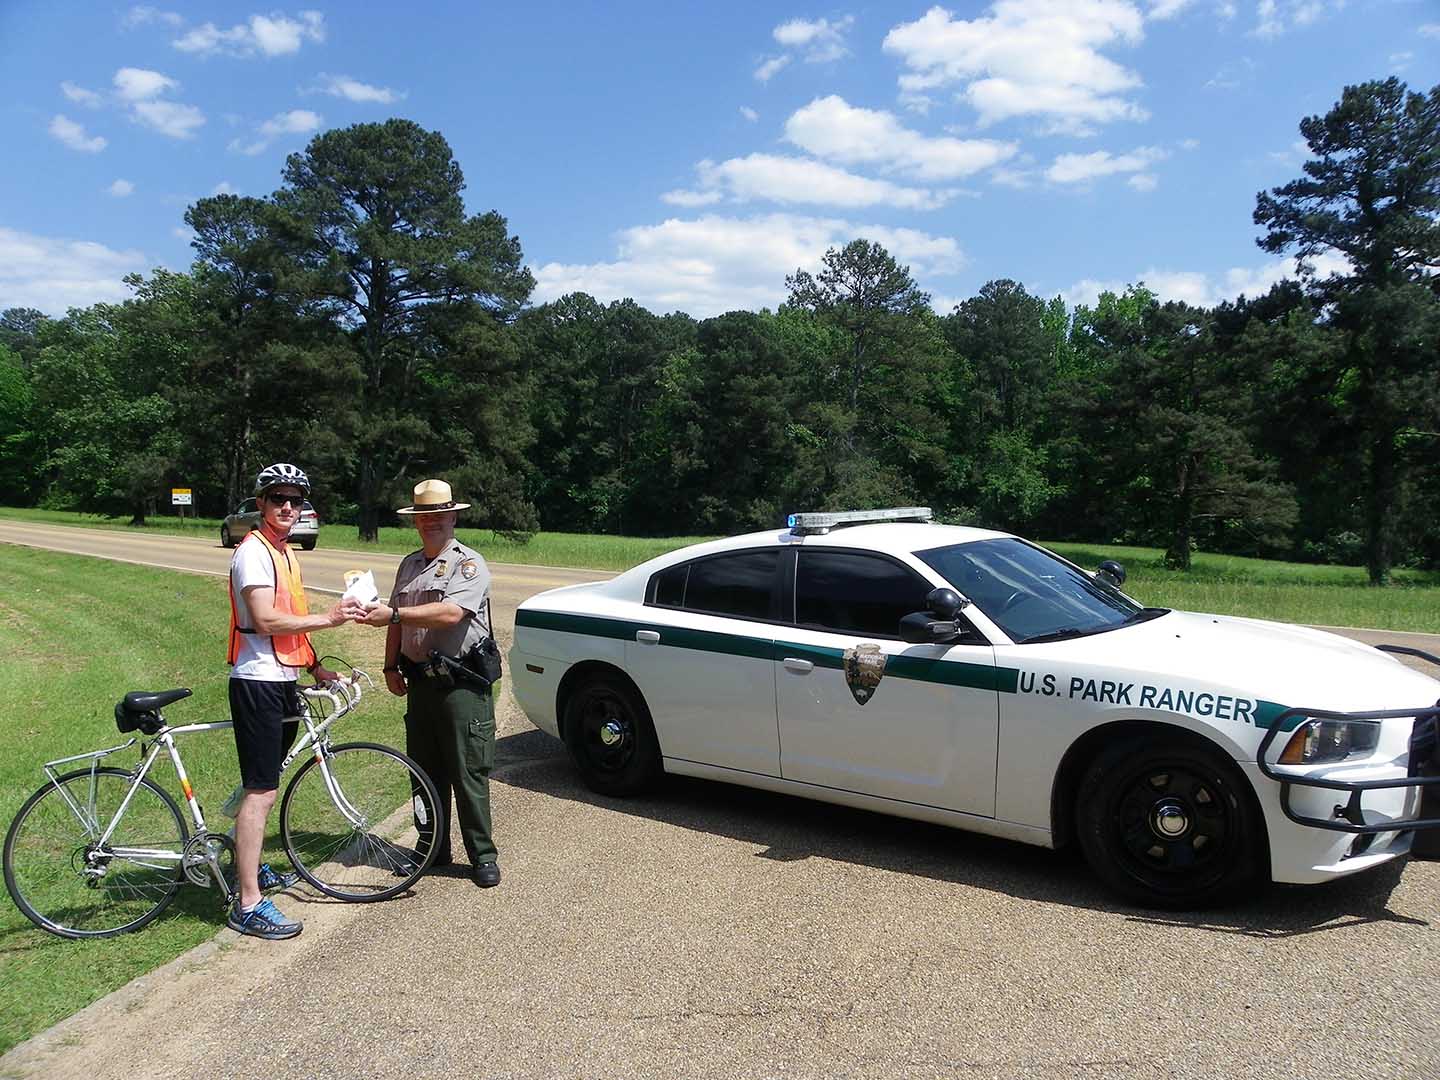 bicyclist, ranger, and patrol vehicle next to roadway